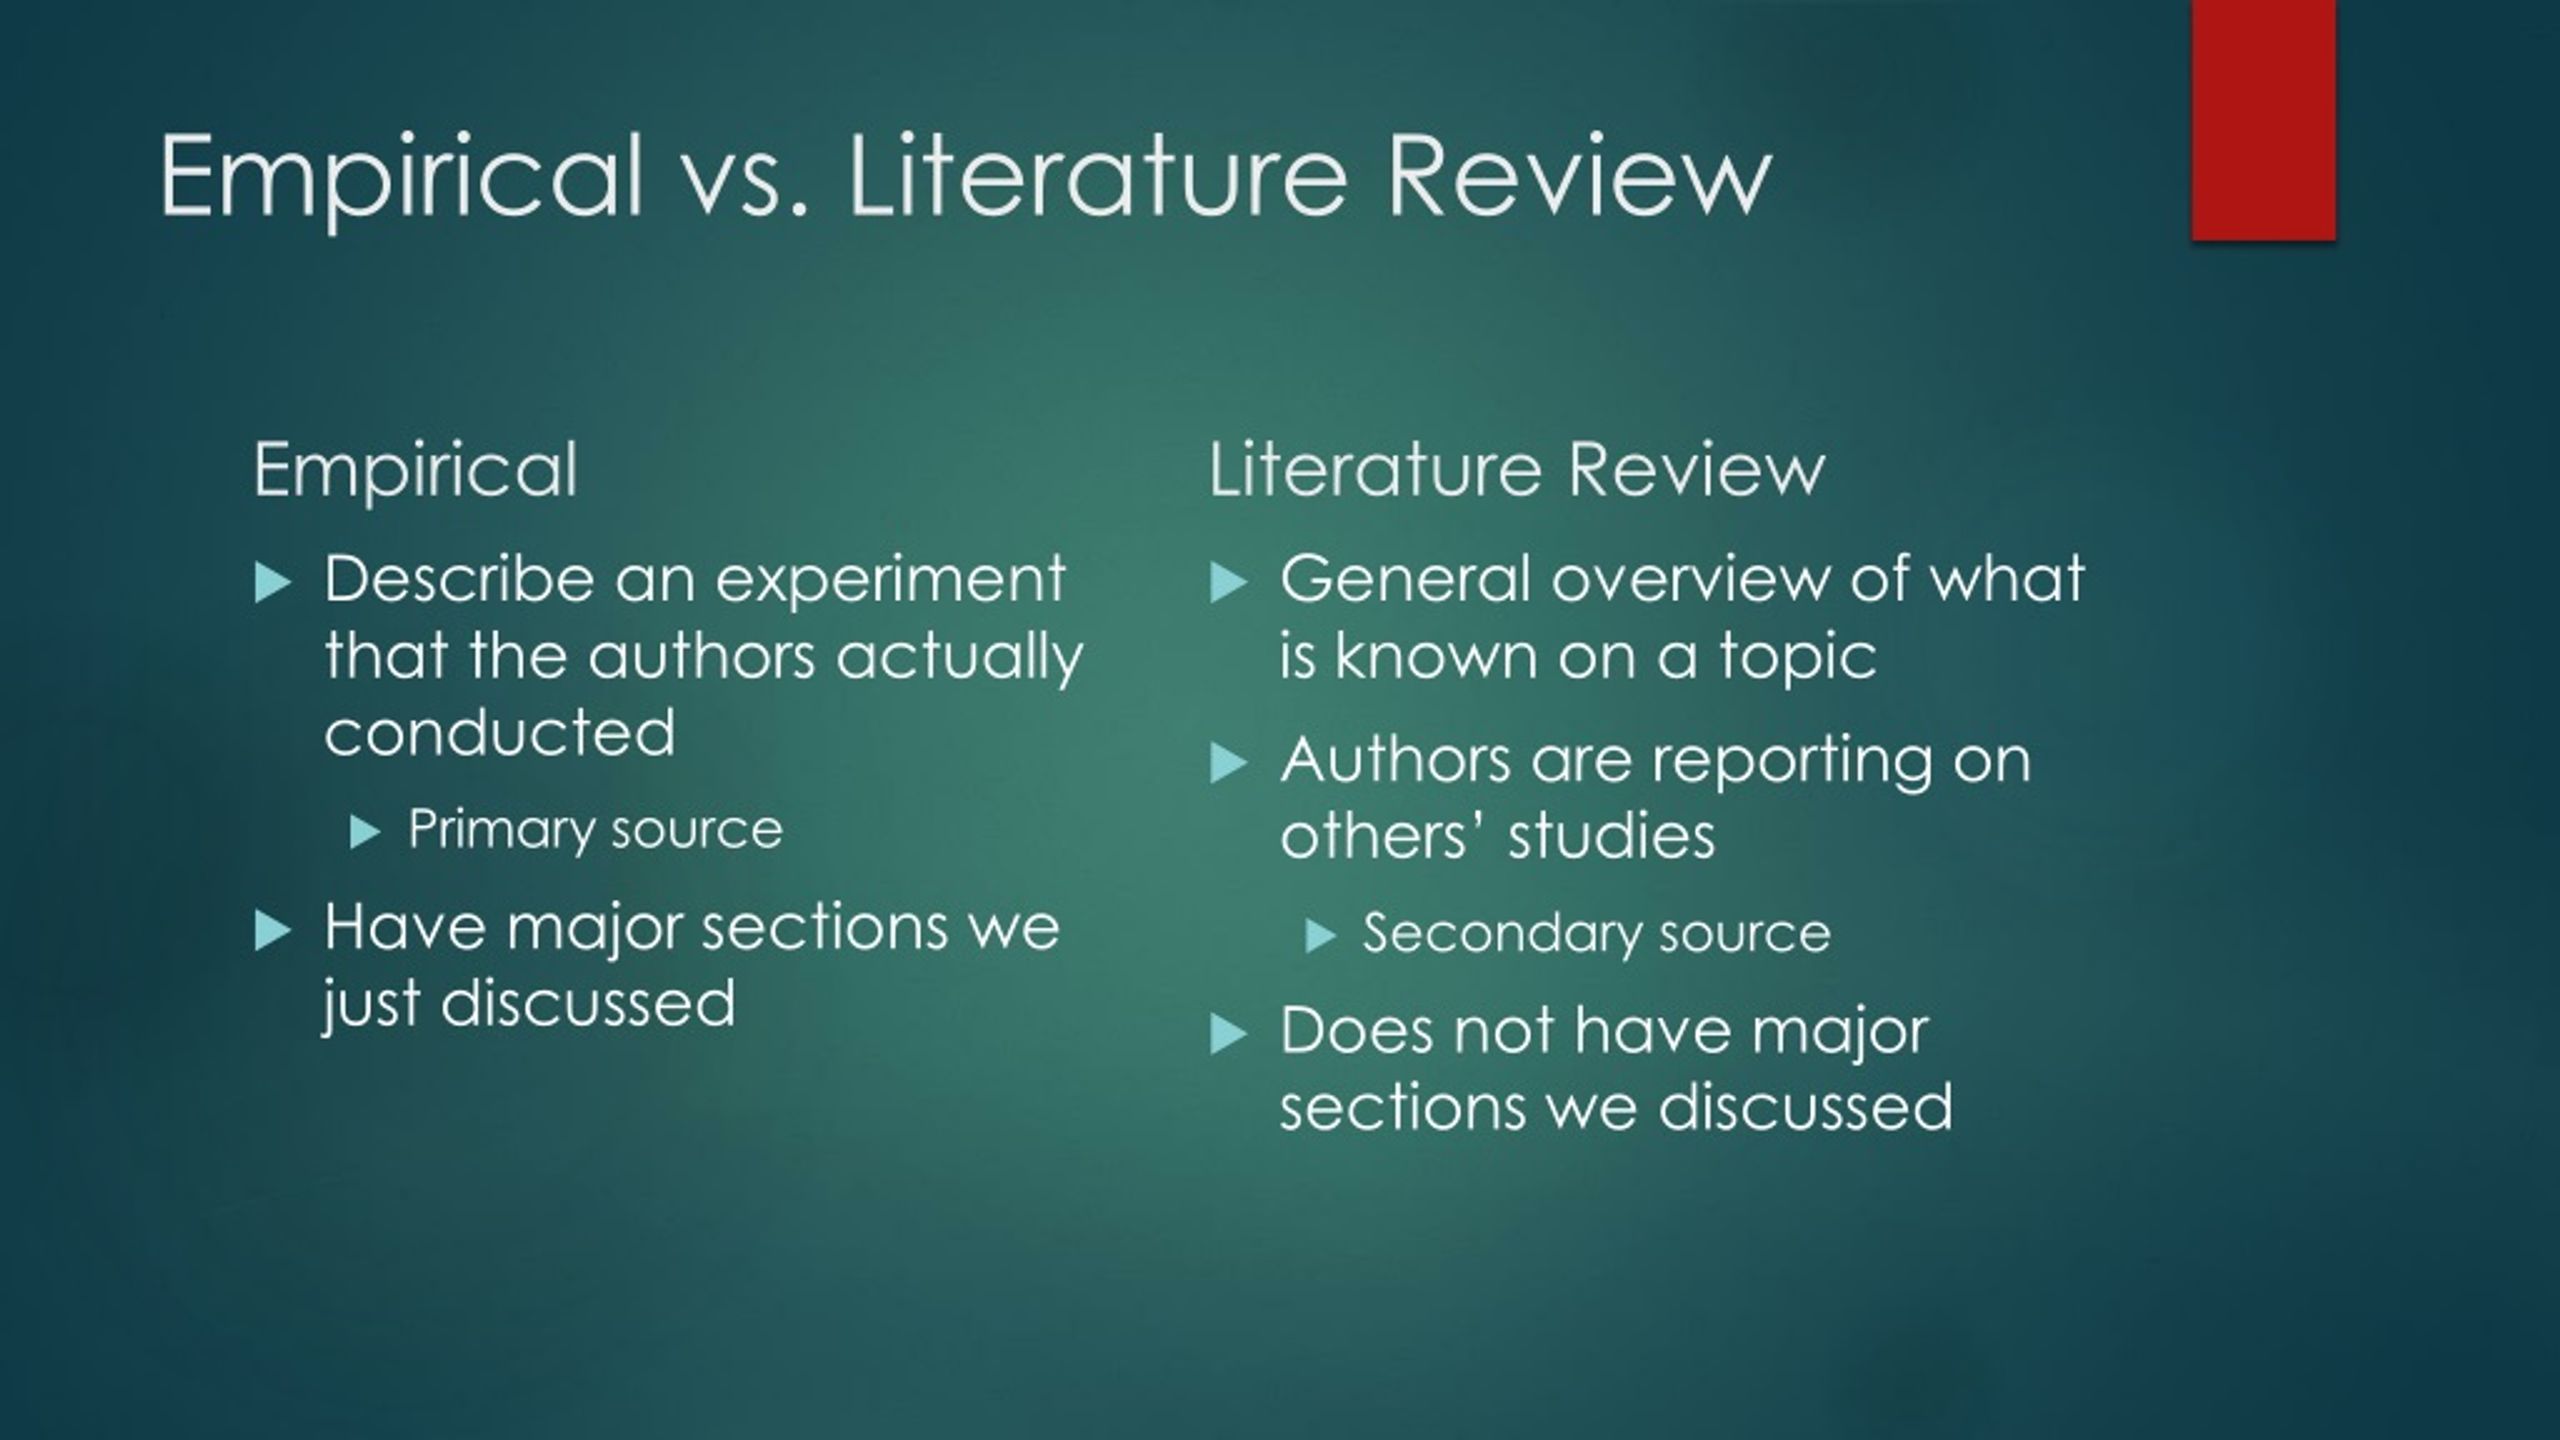 empirical literature review difference